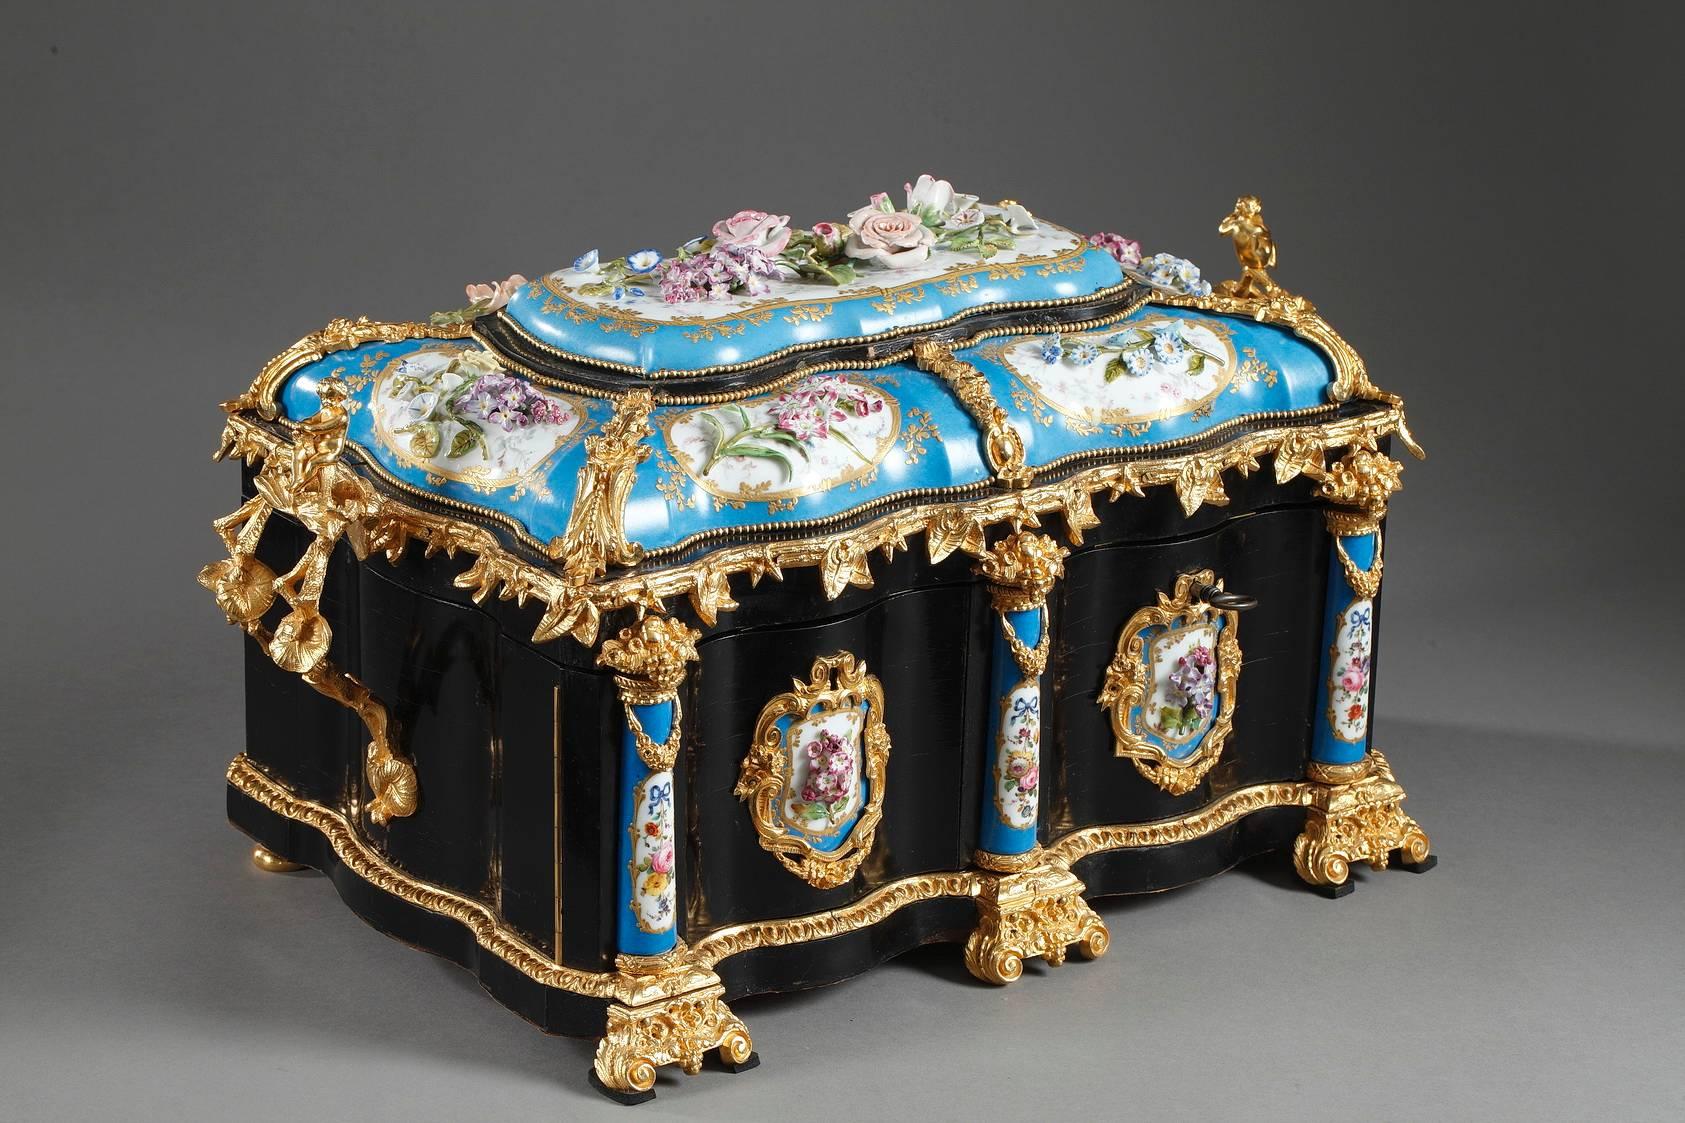 Ebony coffer from the Maison Alphonse Giroux, sumptuously decorated in gilt bronze and porcelain. The lid is richly embellished with rounded porcelain plates that are decorated with multicolored flowers in high relief. The flowers are set in white